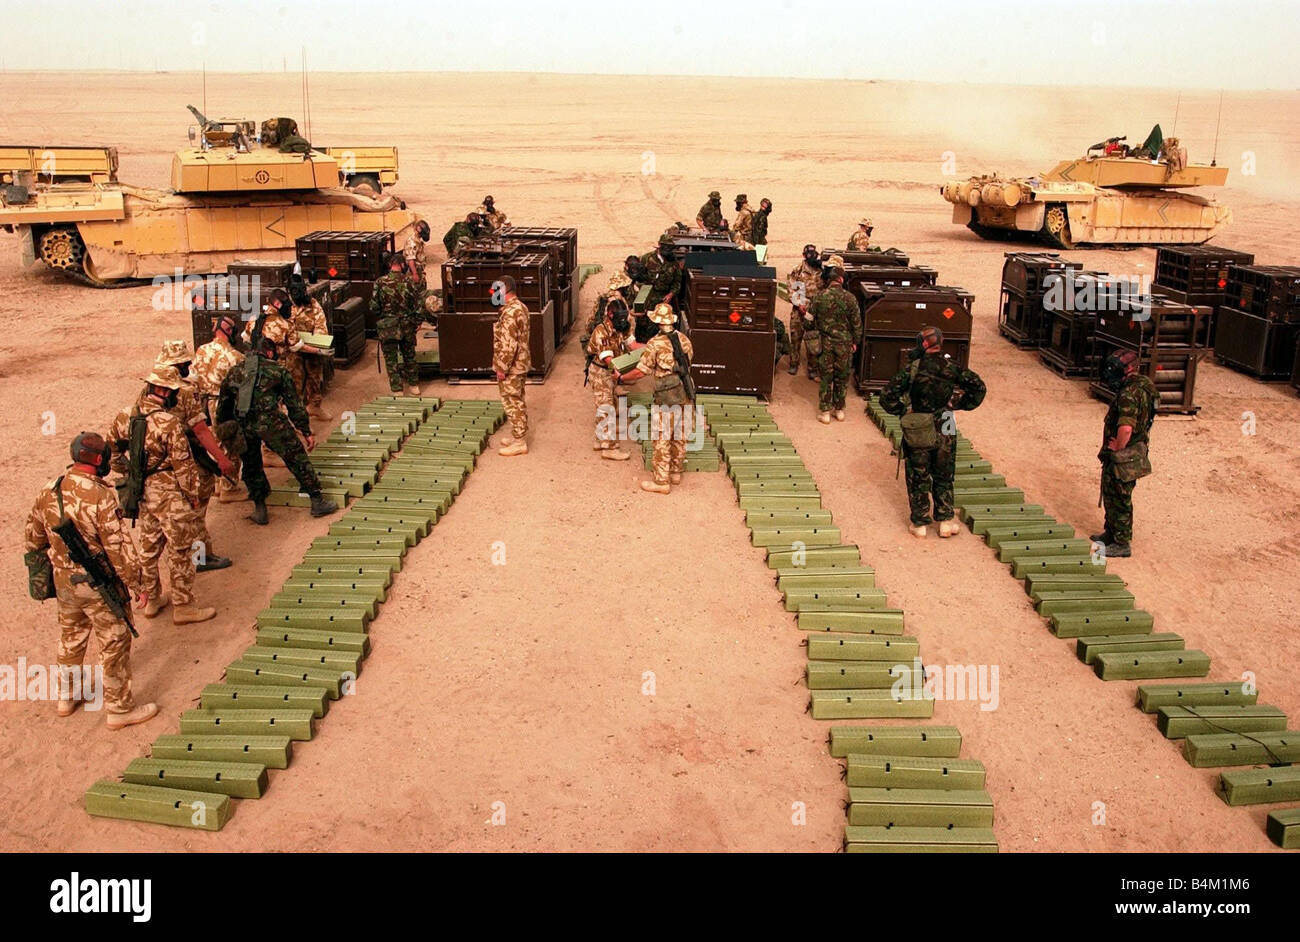 Iraq War 2003 Royal Scots Dragoon Guards load up their tanks with ammunition in Kuwait prior to the invasion of Iraq Stock Photo